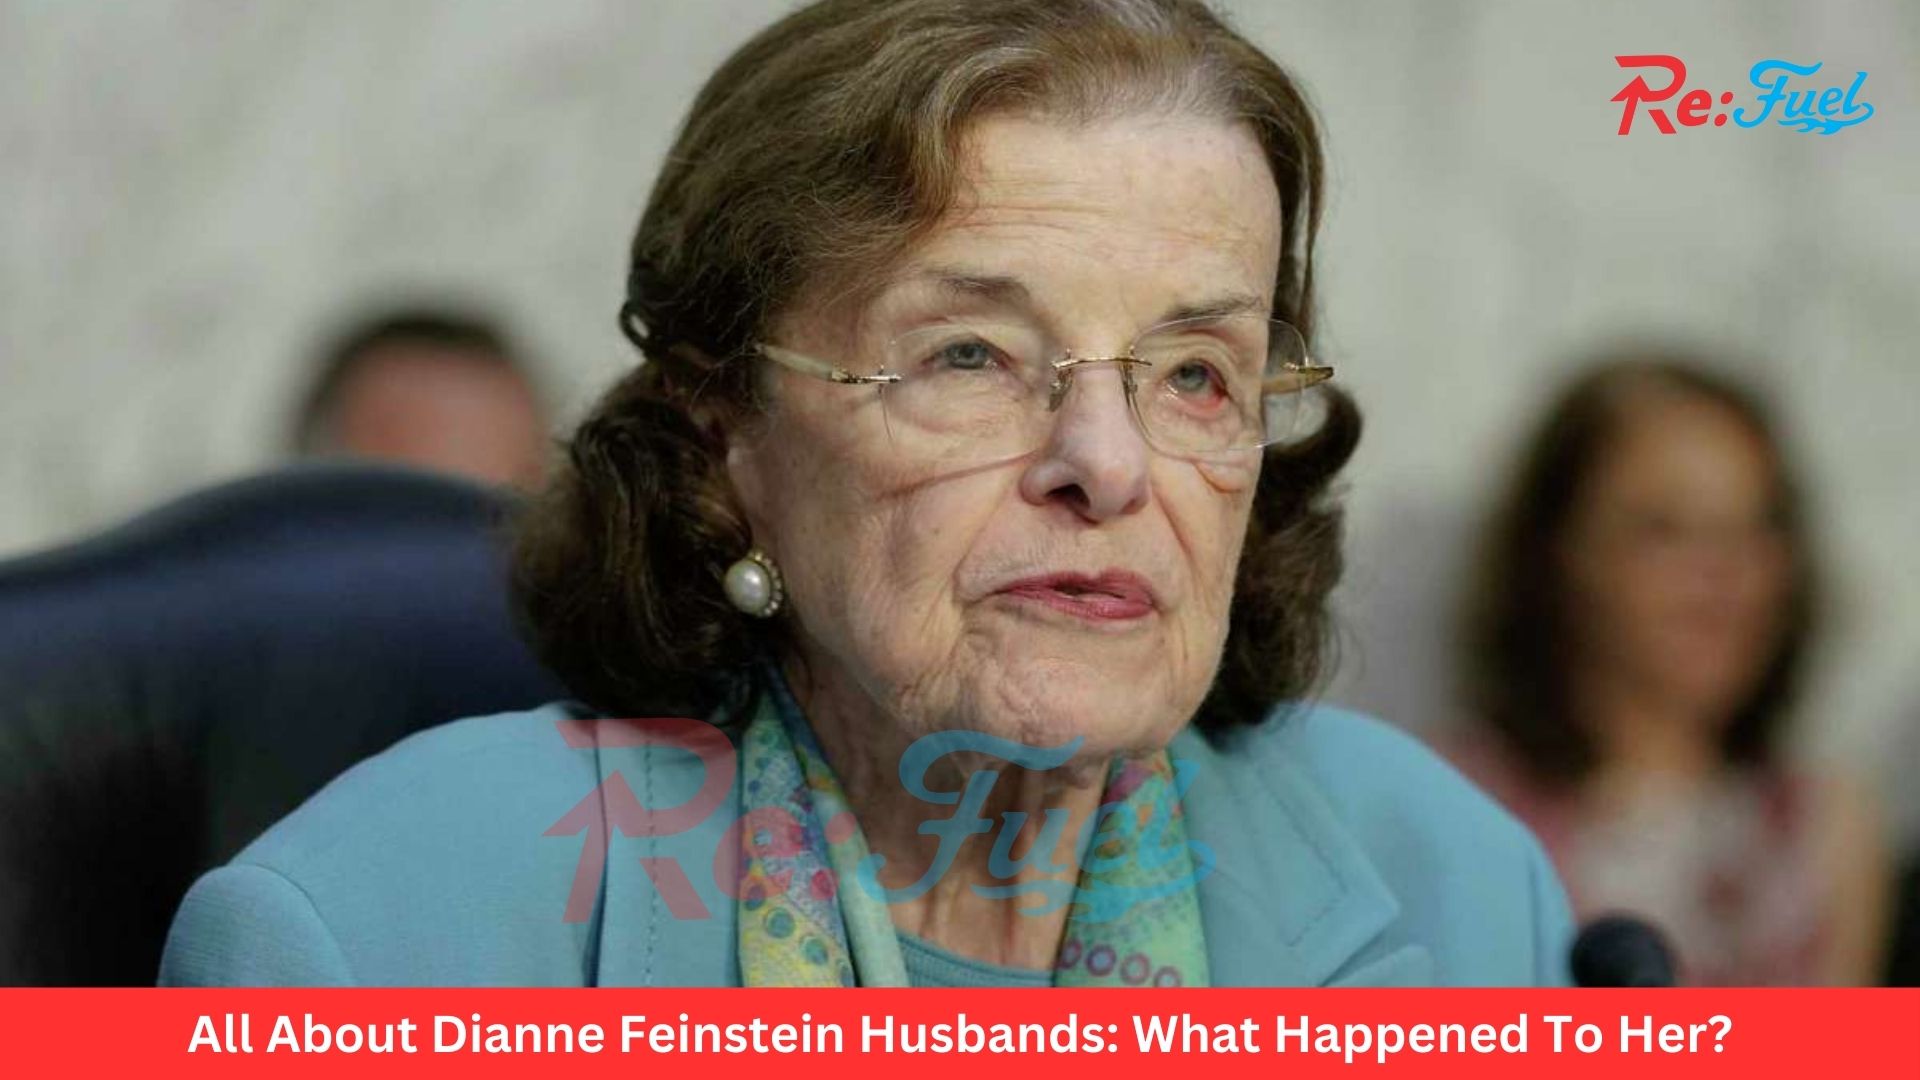 All About Dianne Feinstein's Husbands: What Happened To Her?